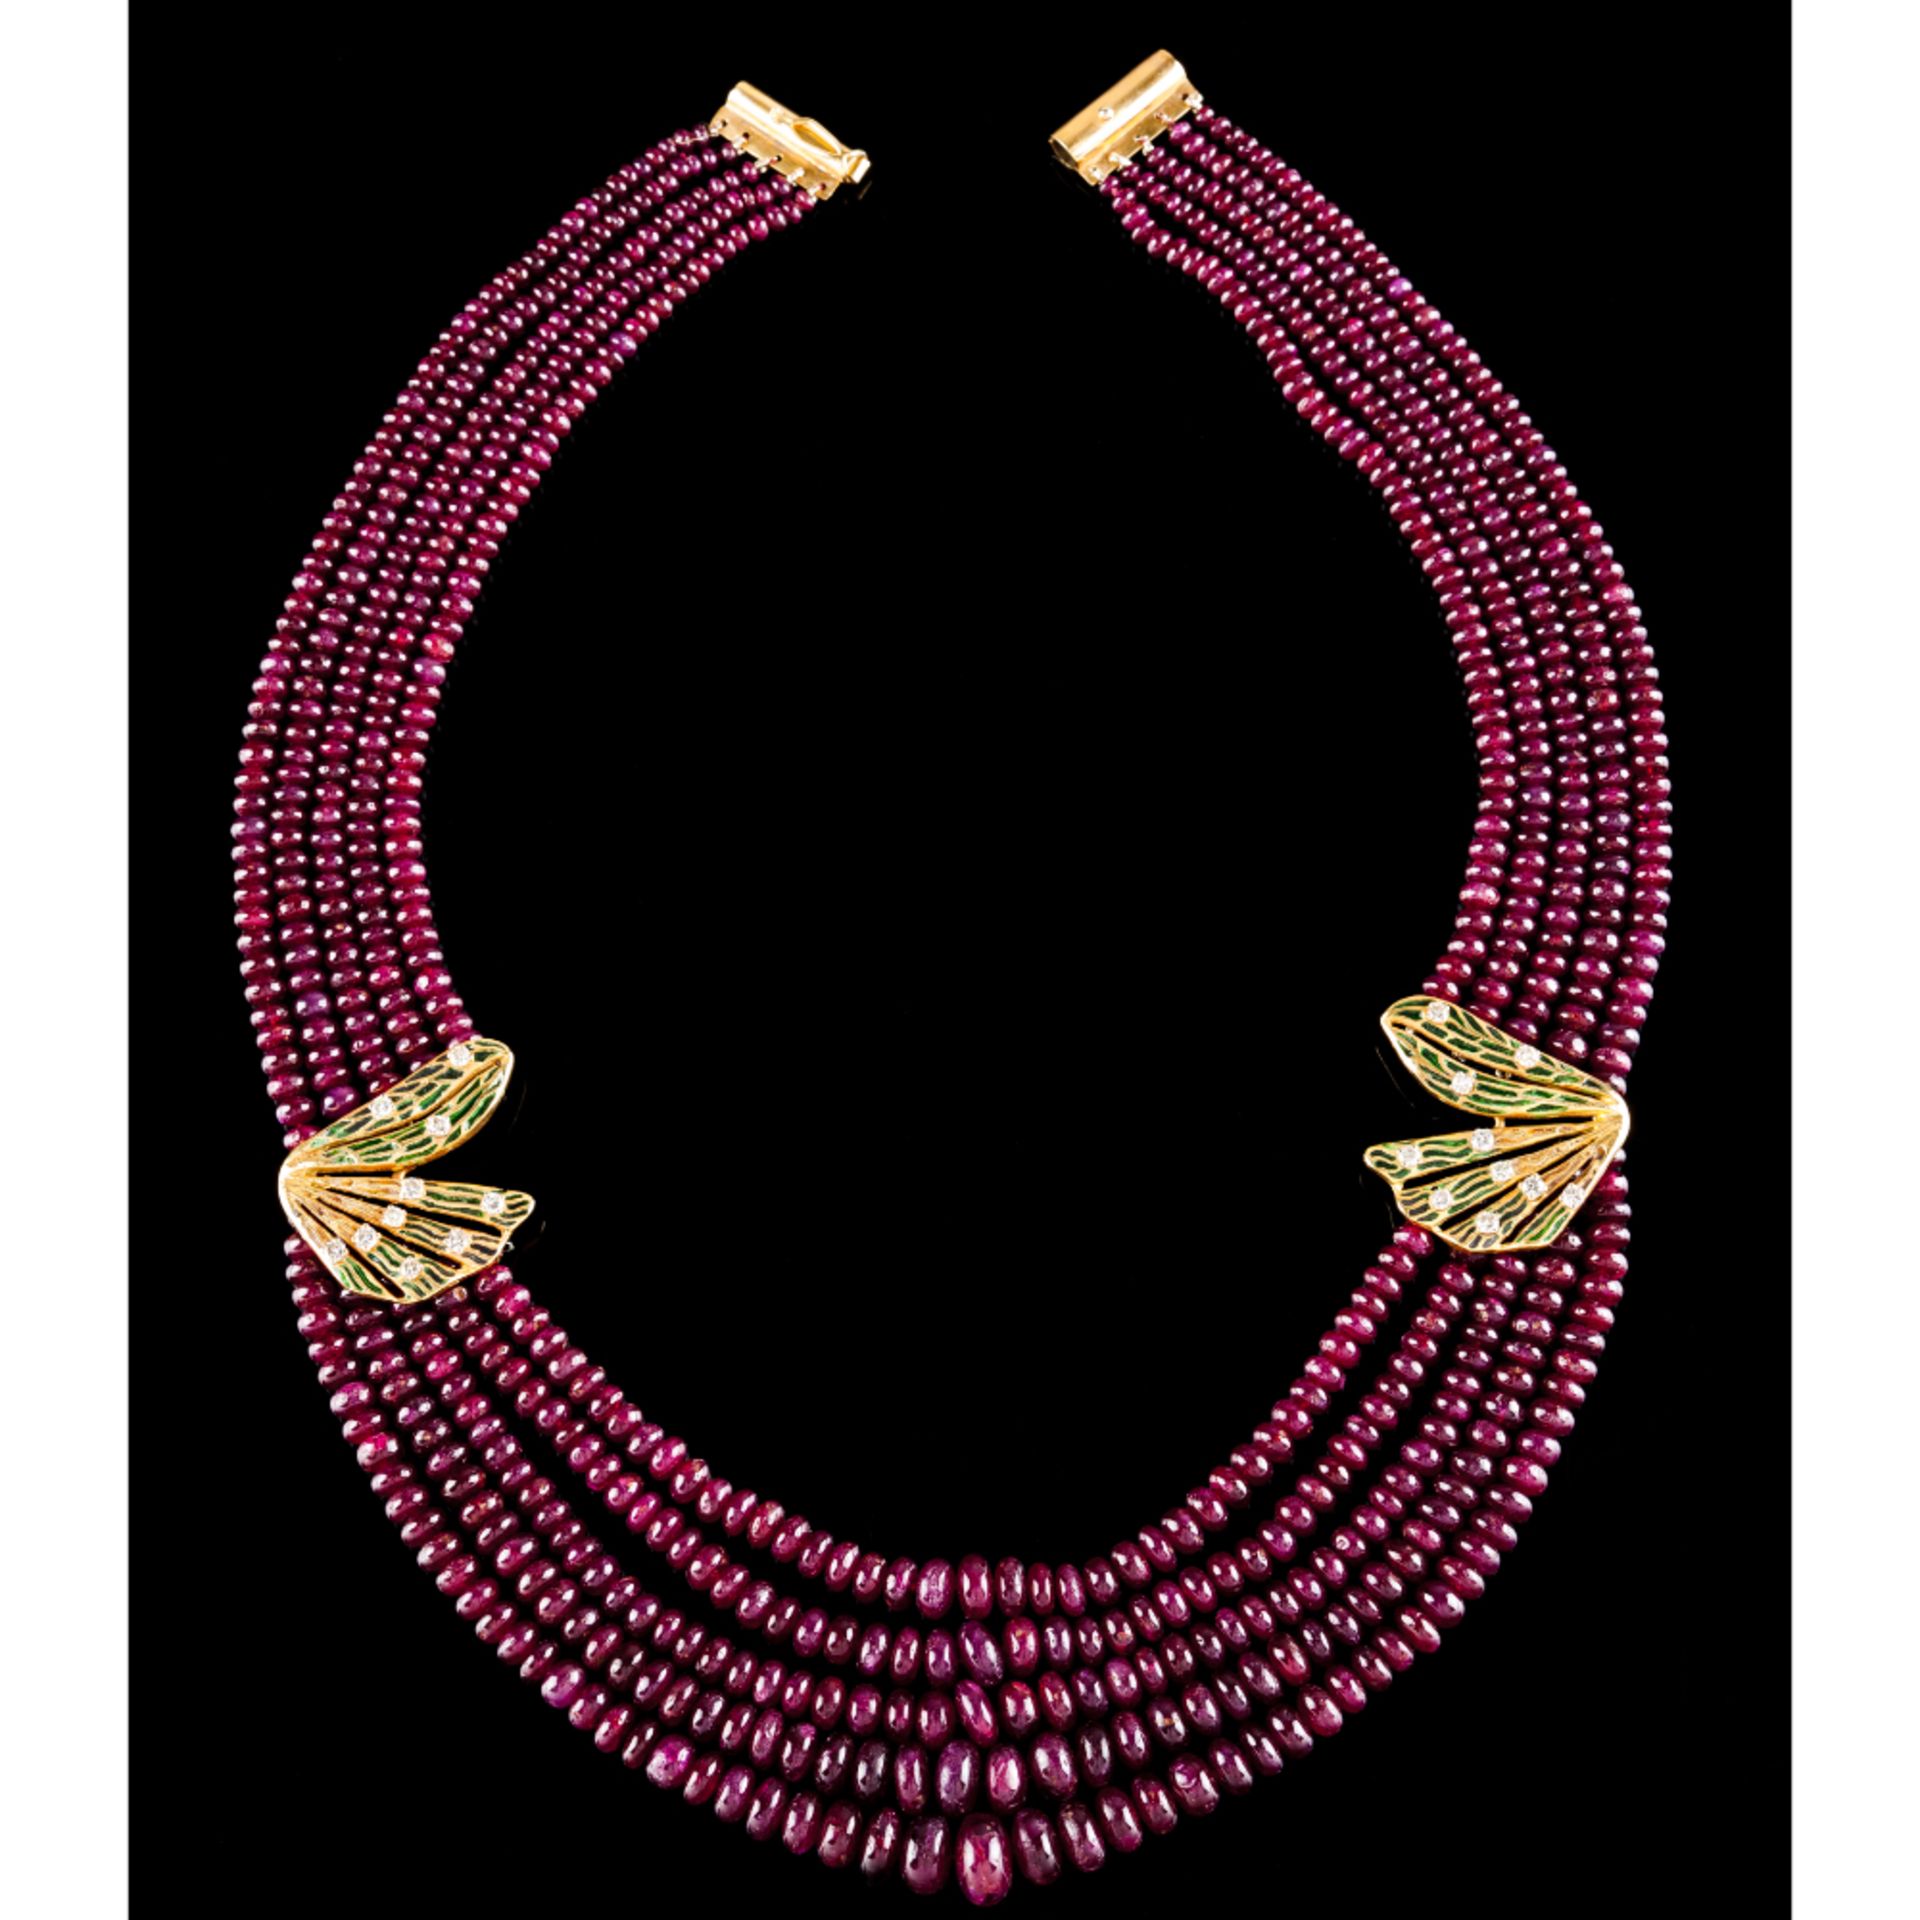 A five strand ruby beads necklaceGold clasp and applied elements Green enamel decoration and set